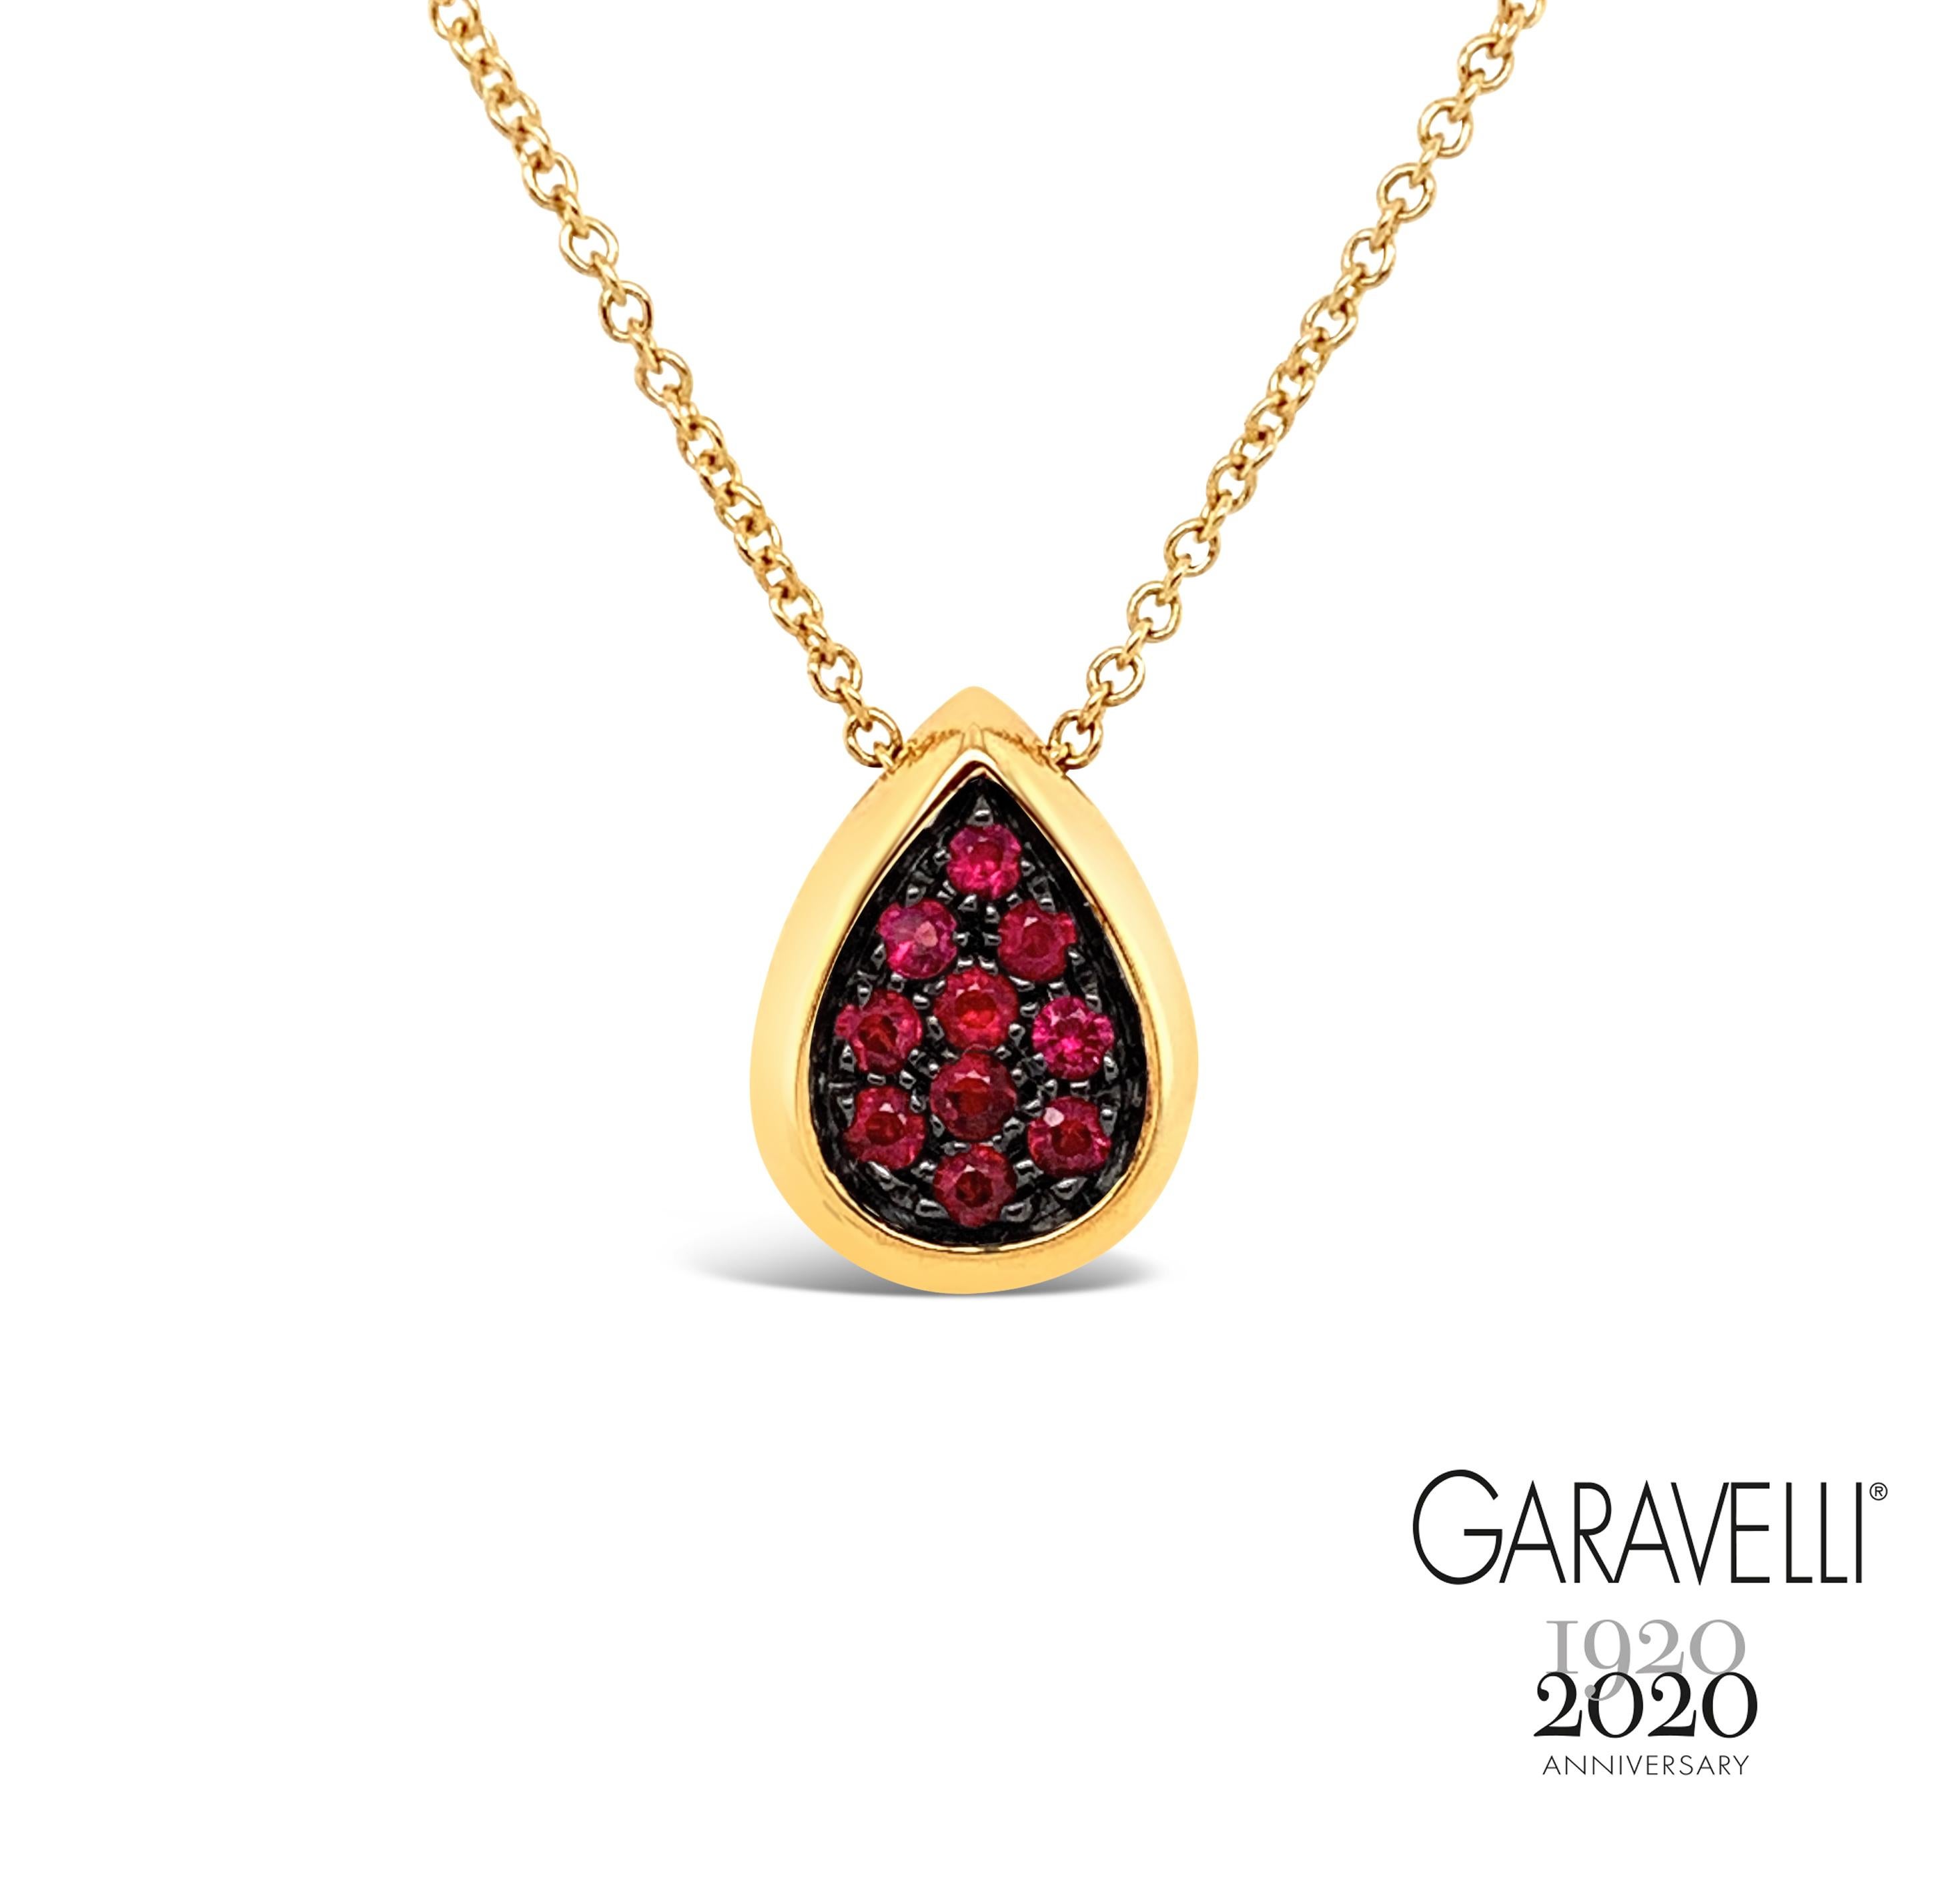 Garavelli DROP Pendant in 18kt Gold with Orange Sapphires.
The new Giotto Collection DROP pendant .
Featuring at your choice: Orange Sapphires, Brown Diamonds, Aquamarine, Rubies or Peridot 
18kt gold Necklace included , lenght 19 inches with a loop